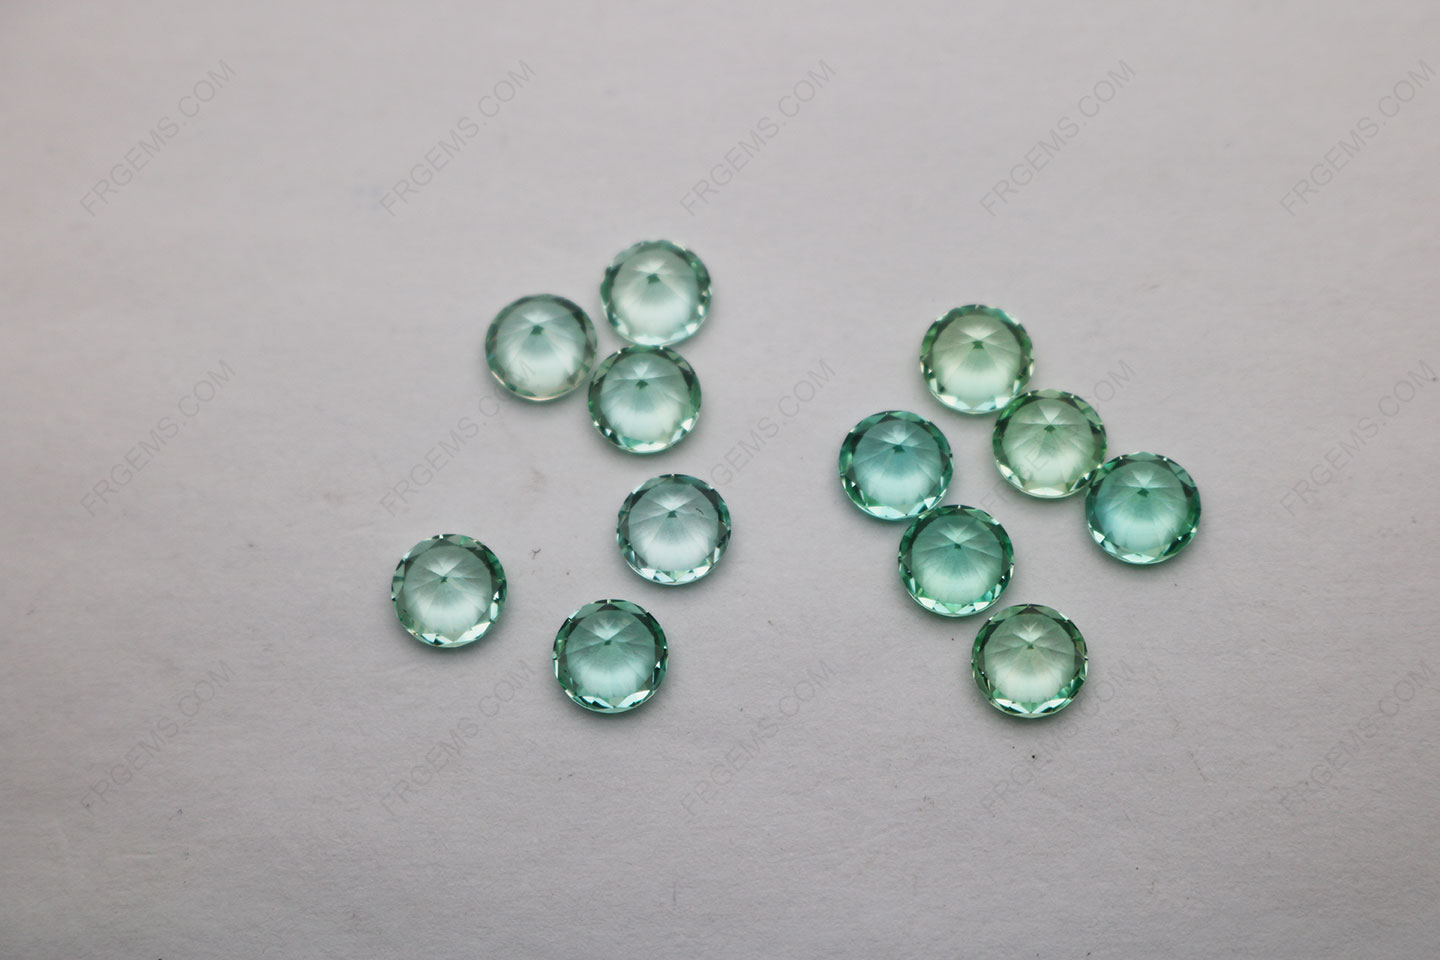 Wholesale Synthetic Corundum Mint Green 73# Round Shape Faceted Loose  Gemstones from China-Loose Gemstones Suppliers-FU RONG GEMS China